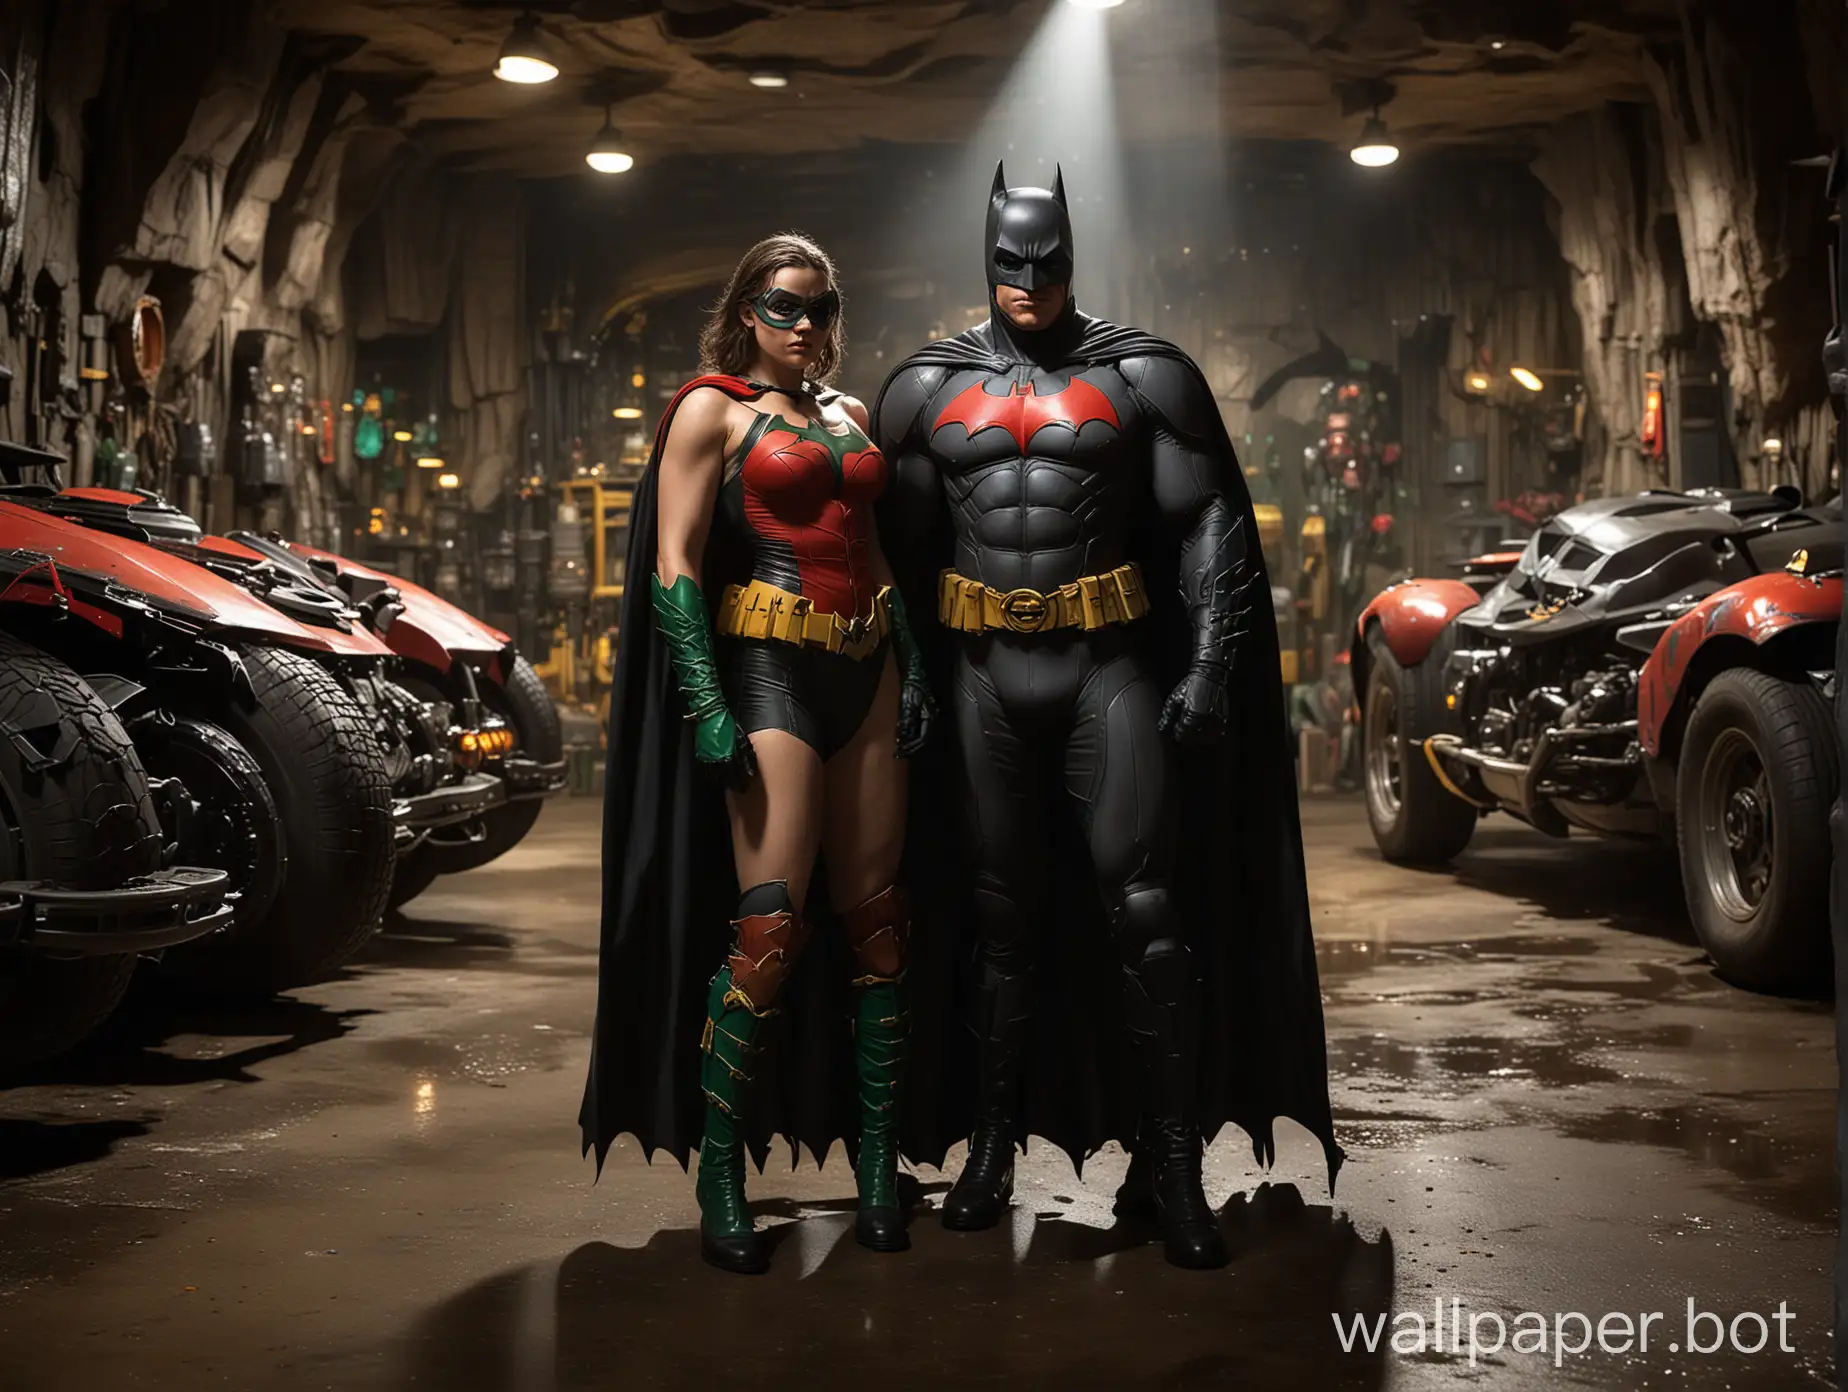 A striking candid photograph featuring a muscular Batman and a plump Robin, also known as Boy Wonder, standing together in the iconic Batcave. Batman dons his traditional dark armour, while Robin sports his colourful costume in this vibrant scene. The Batmobile, a classic sleek design, is visible in the background, and a spotlight illuminates the trio. The overall ambiance of the image exudes a sense of camaraderie and determination.